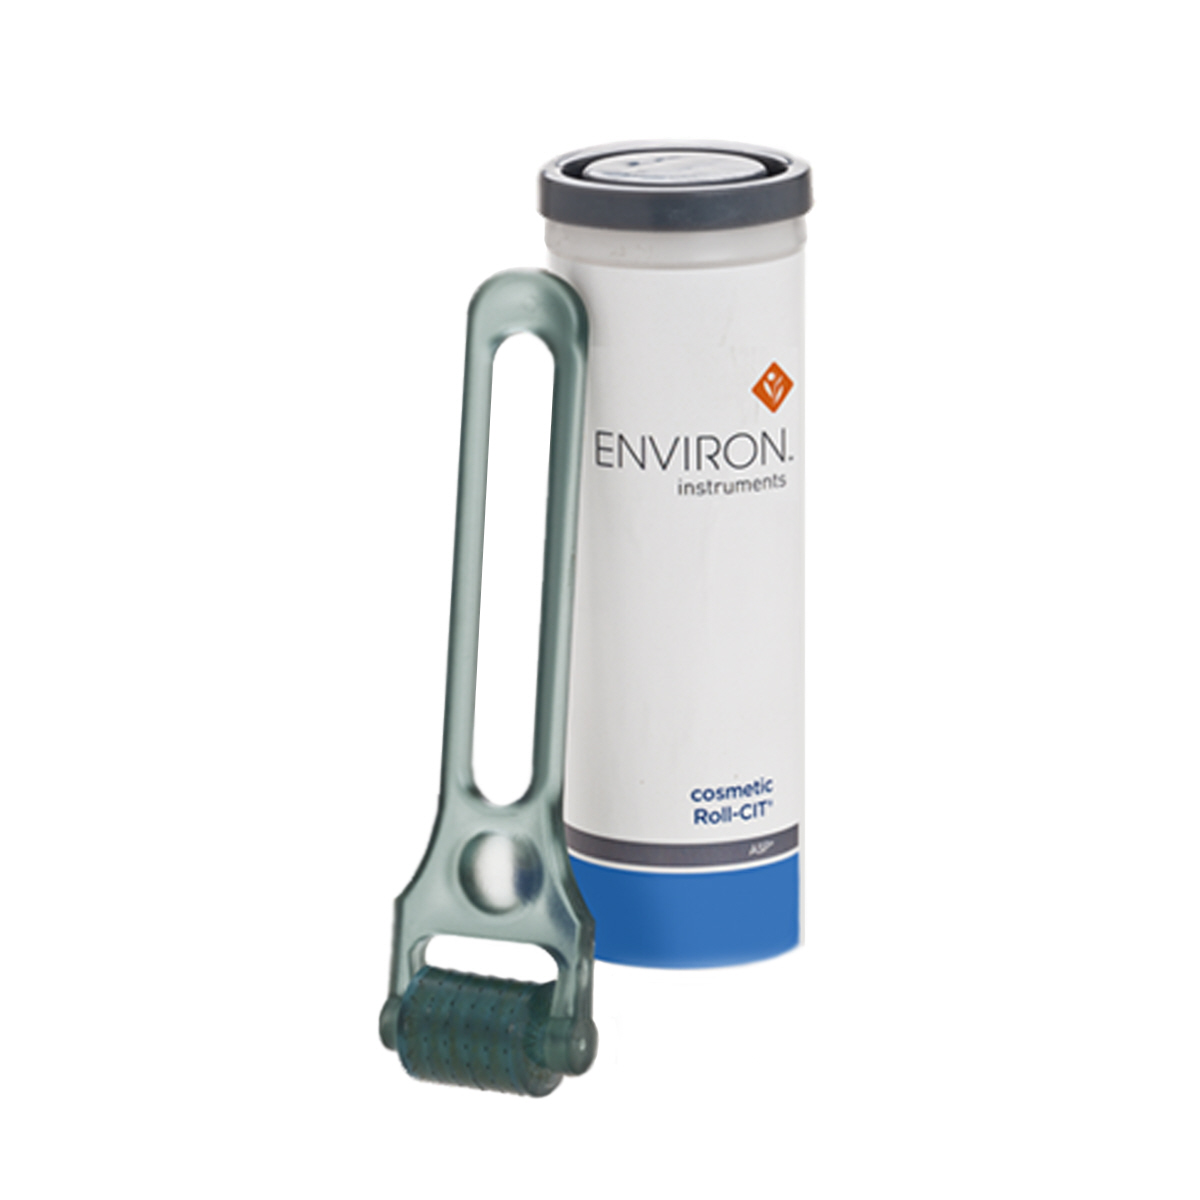 Environ Cosmetic Roll Cit